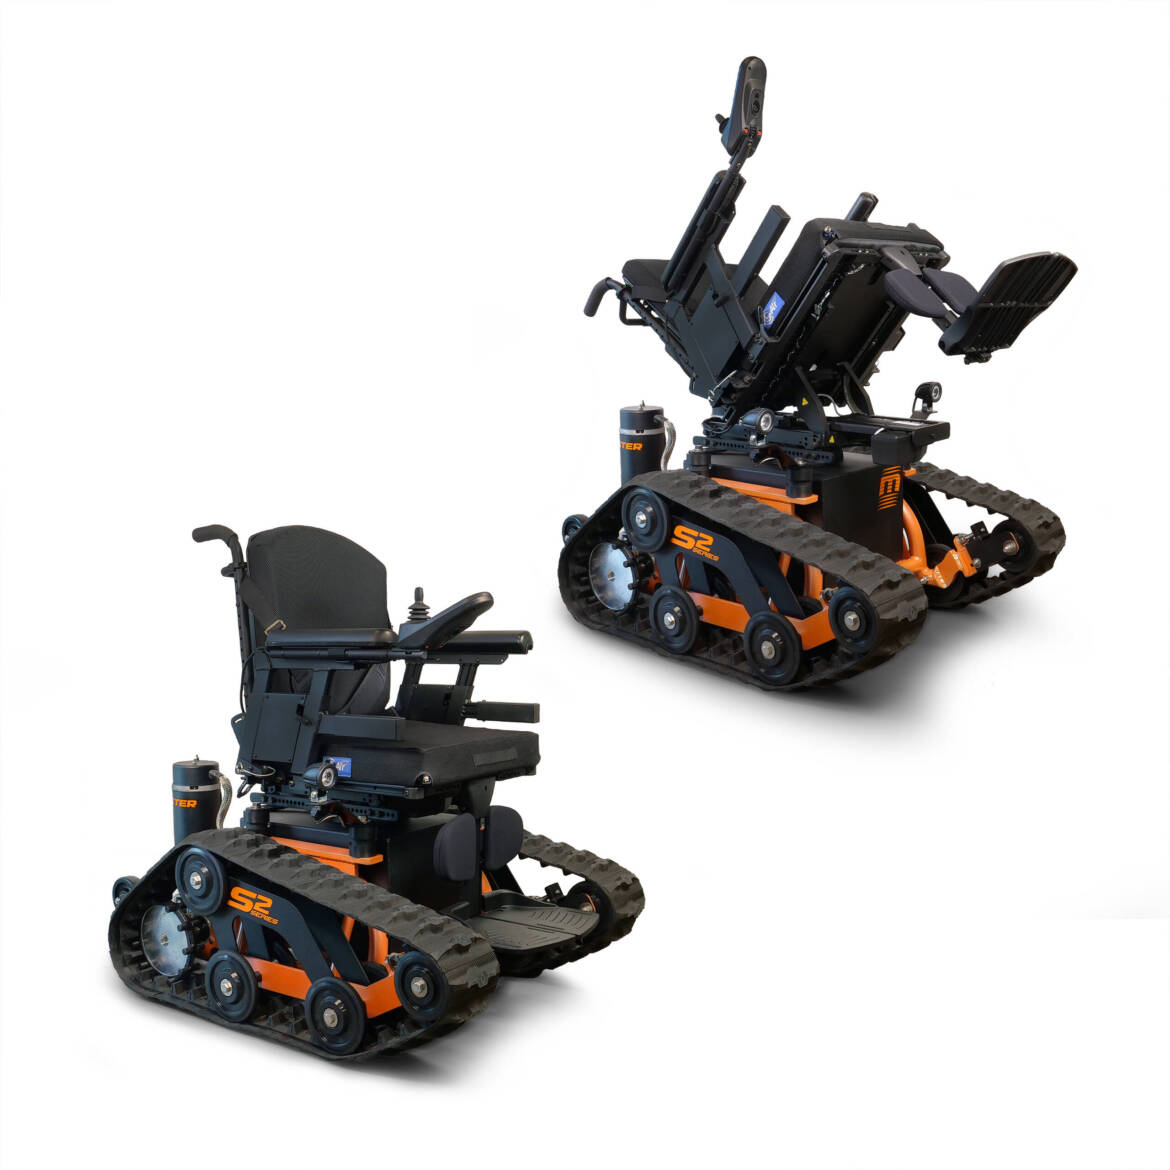 CZ-Track-Master-Chair-3-Combined-9x9-no-frame-scaled.jpg